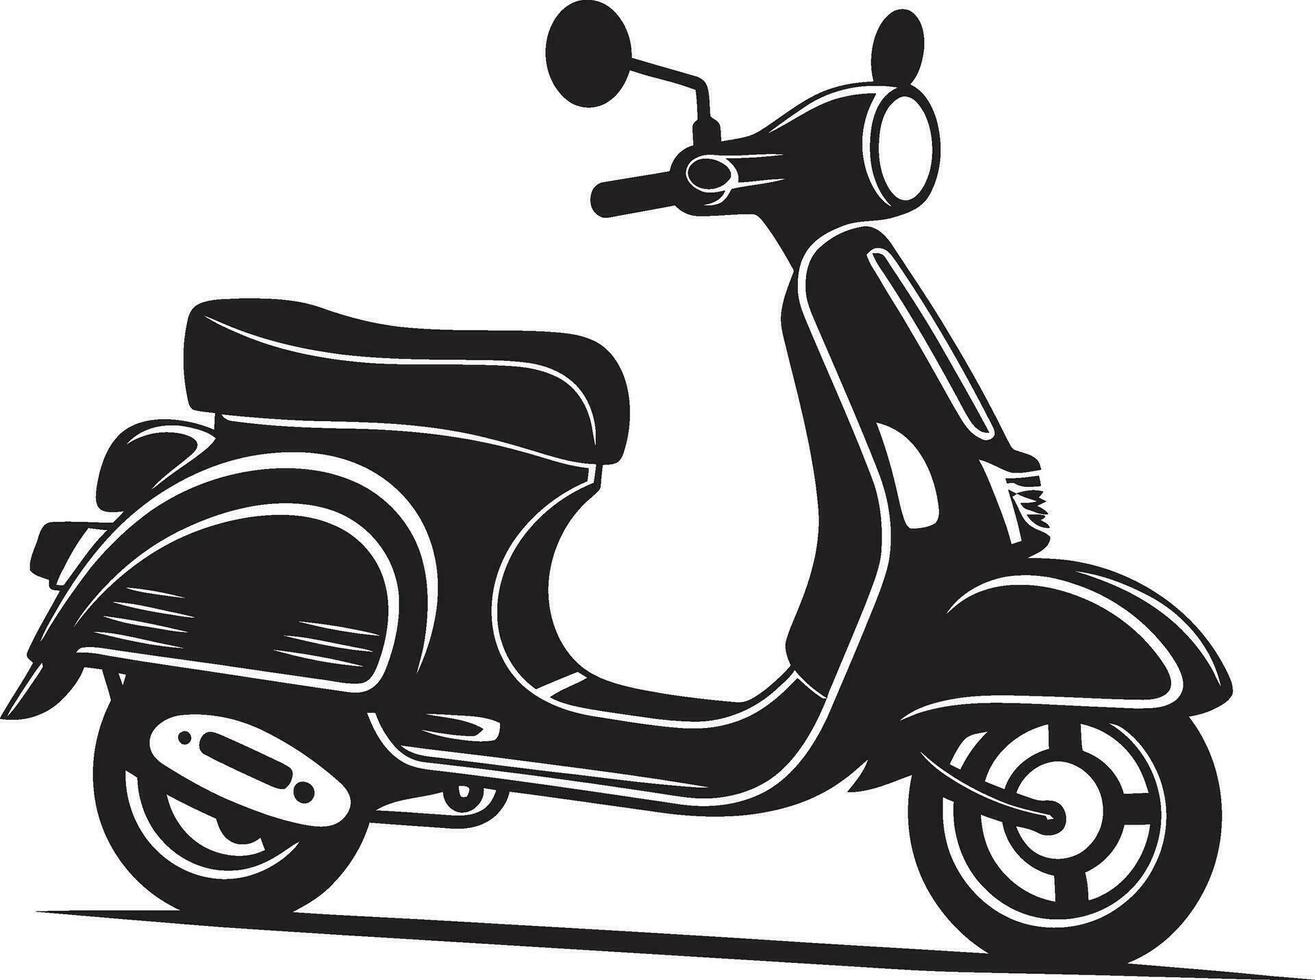 Scooter Travel Adventure Graphics Scooter Parts and Components vector